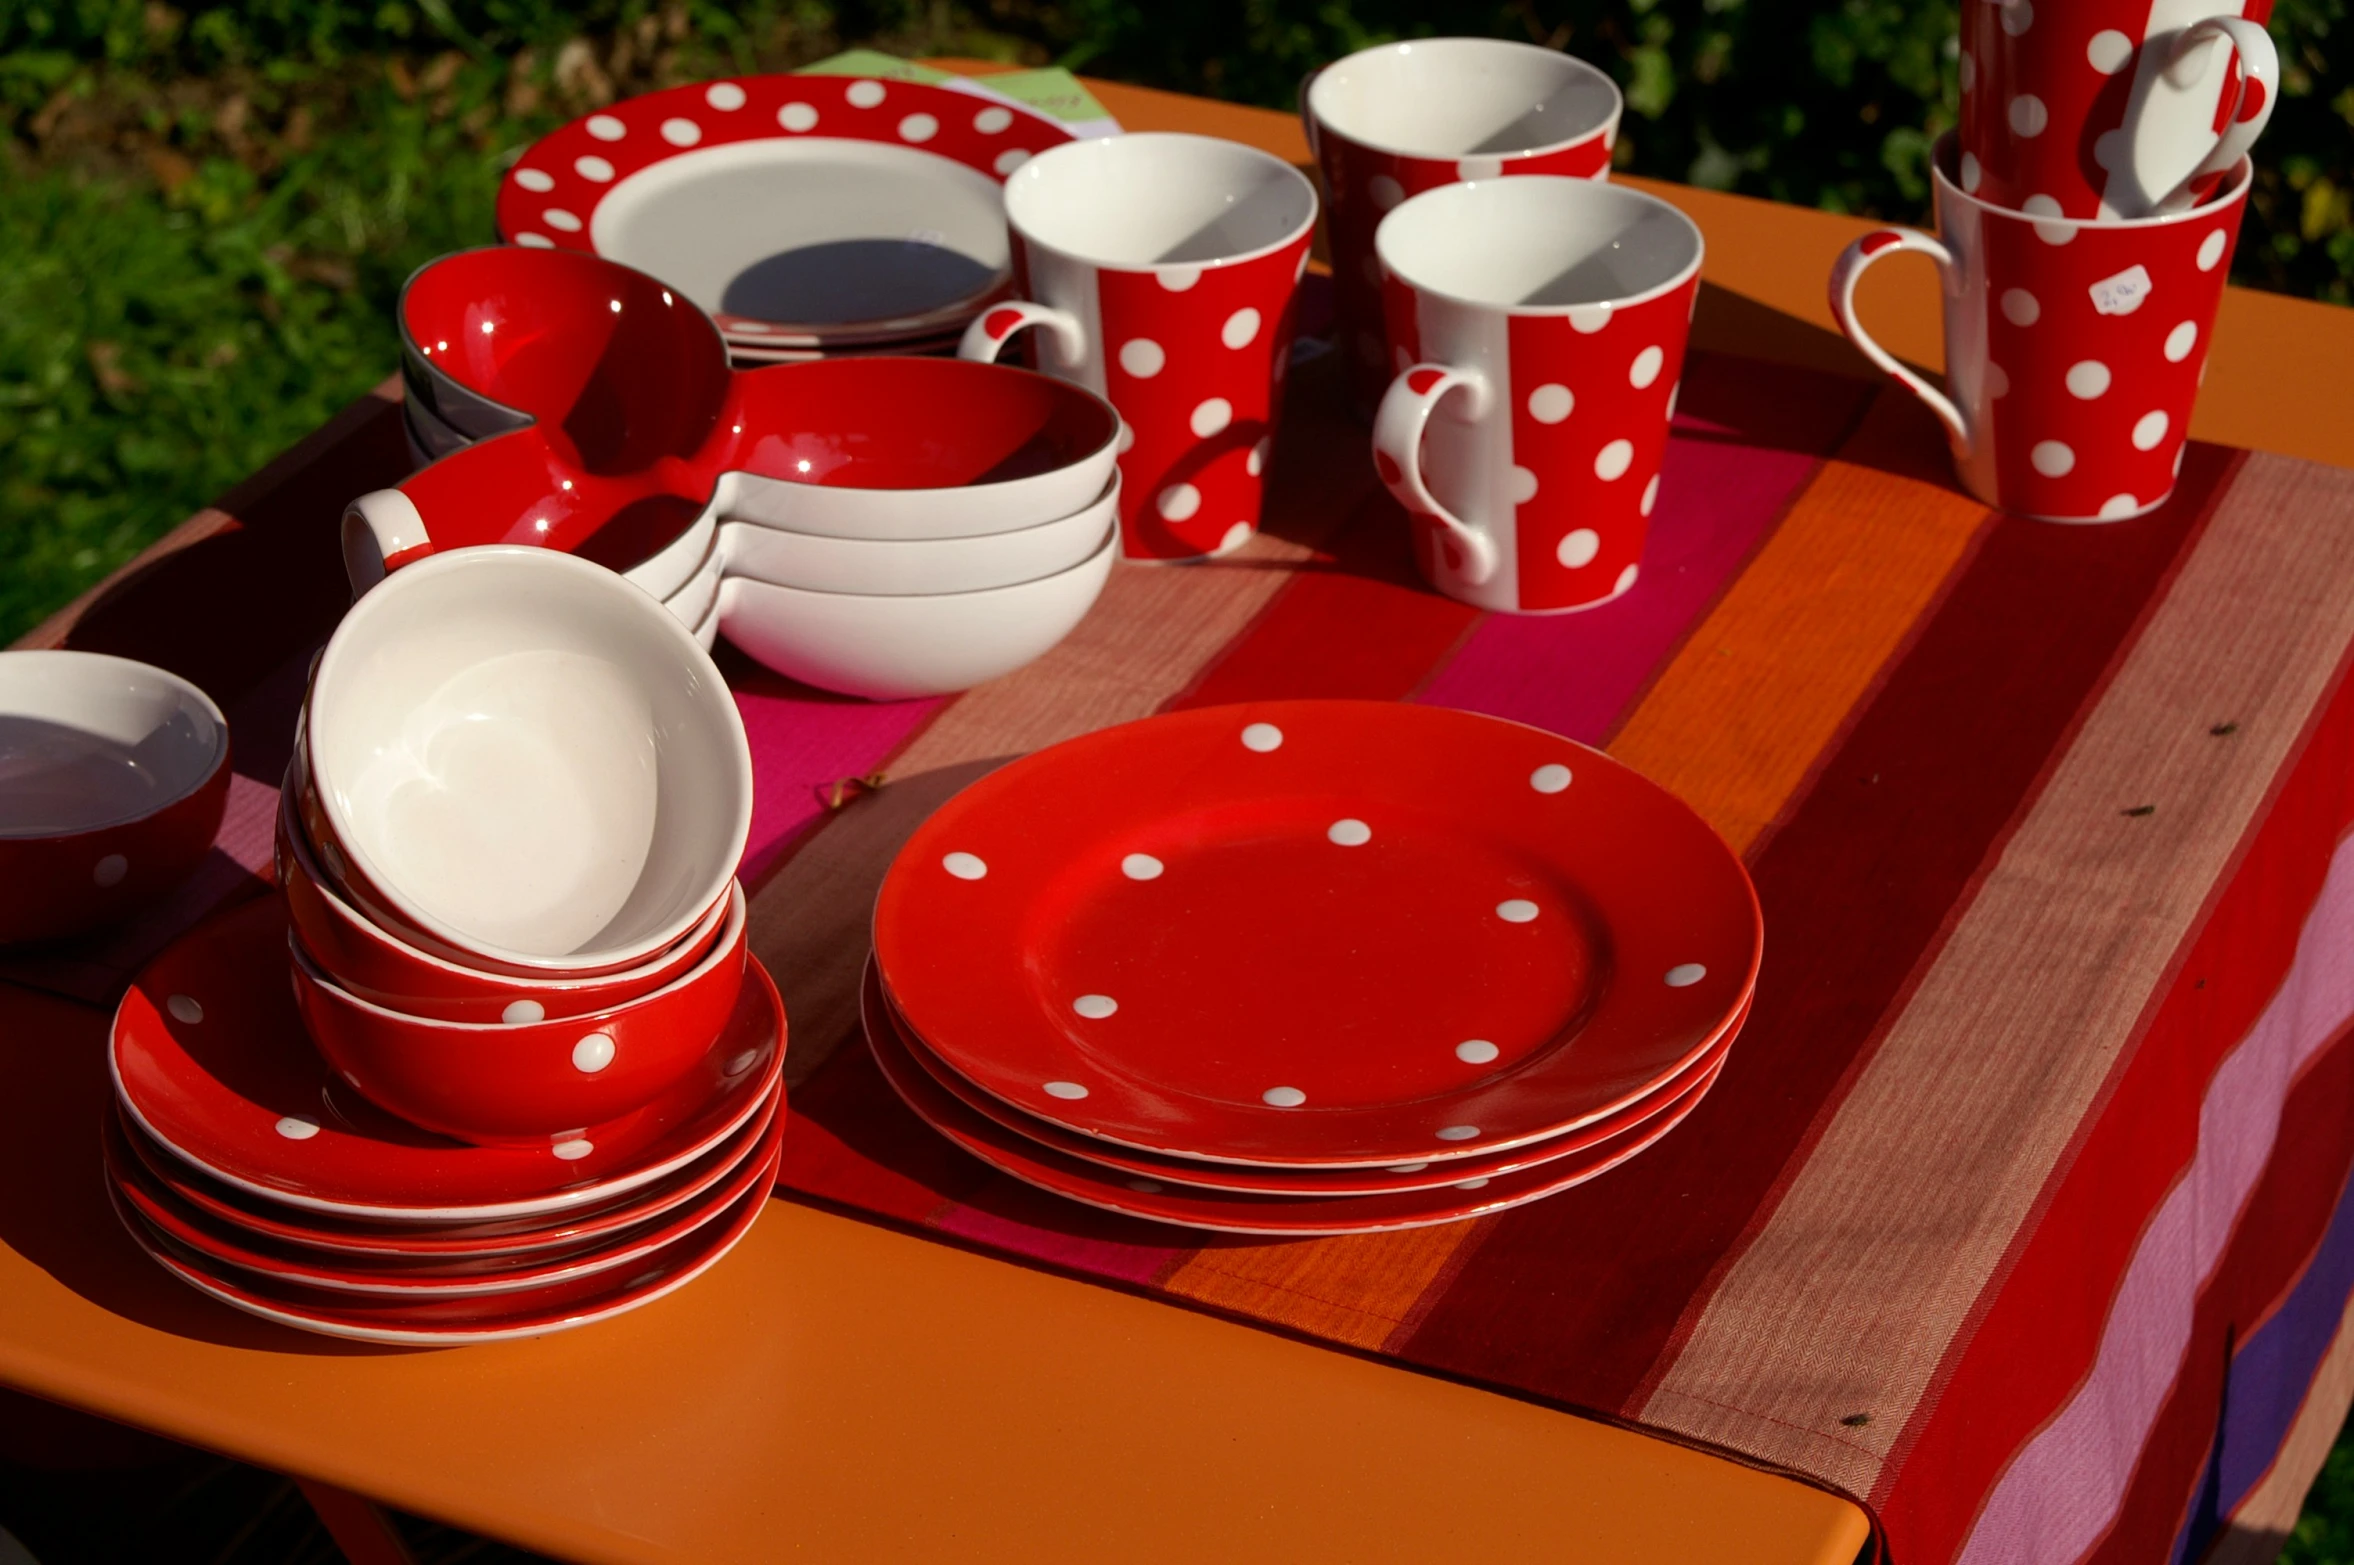 plates and cups sit on a table near red stripes